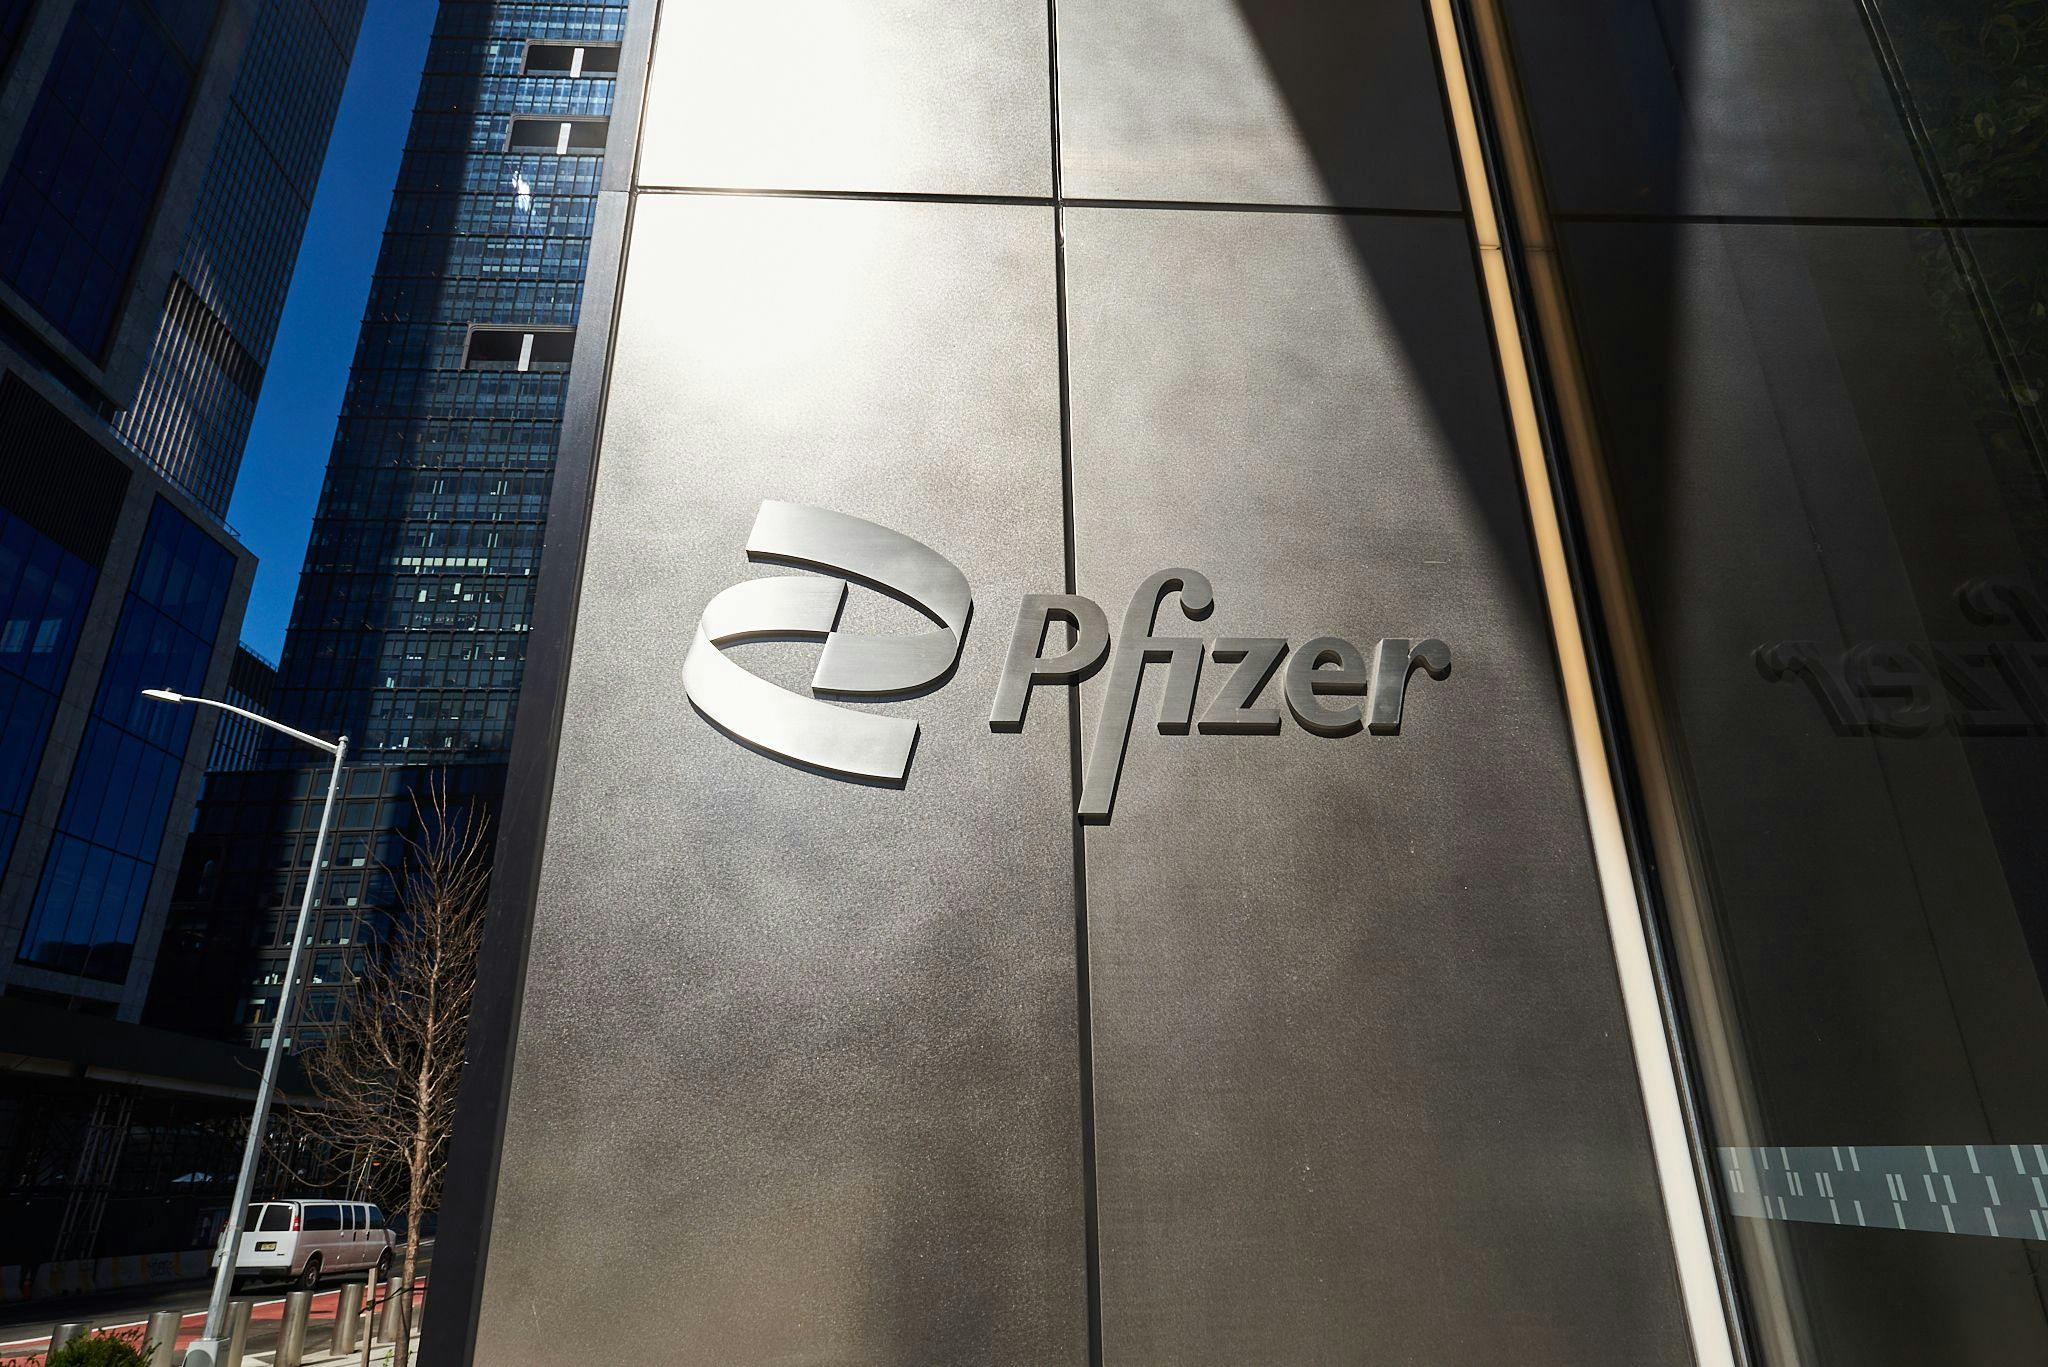 After a tornado damaged a Pfizer plant in North Carolina, the drug company says it's still assessing the impact on production. The plant is a key supplier of sterile injectables. (Photo: Pfizer)